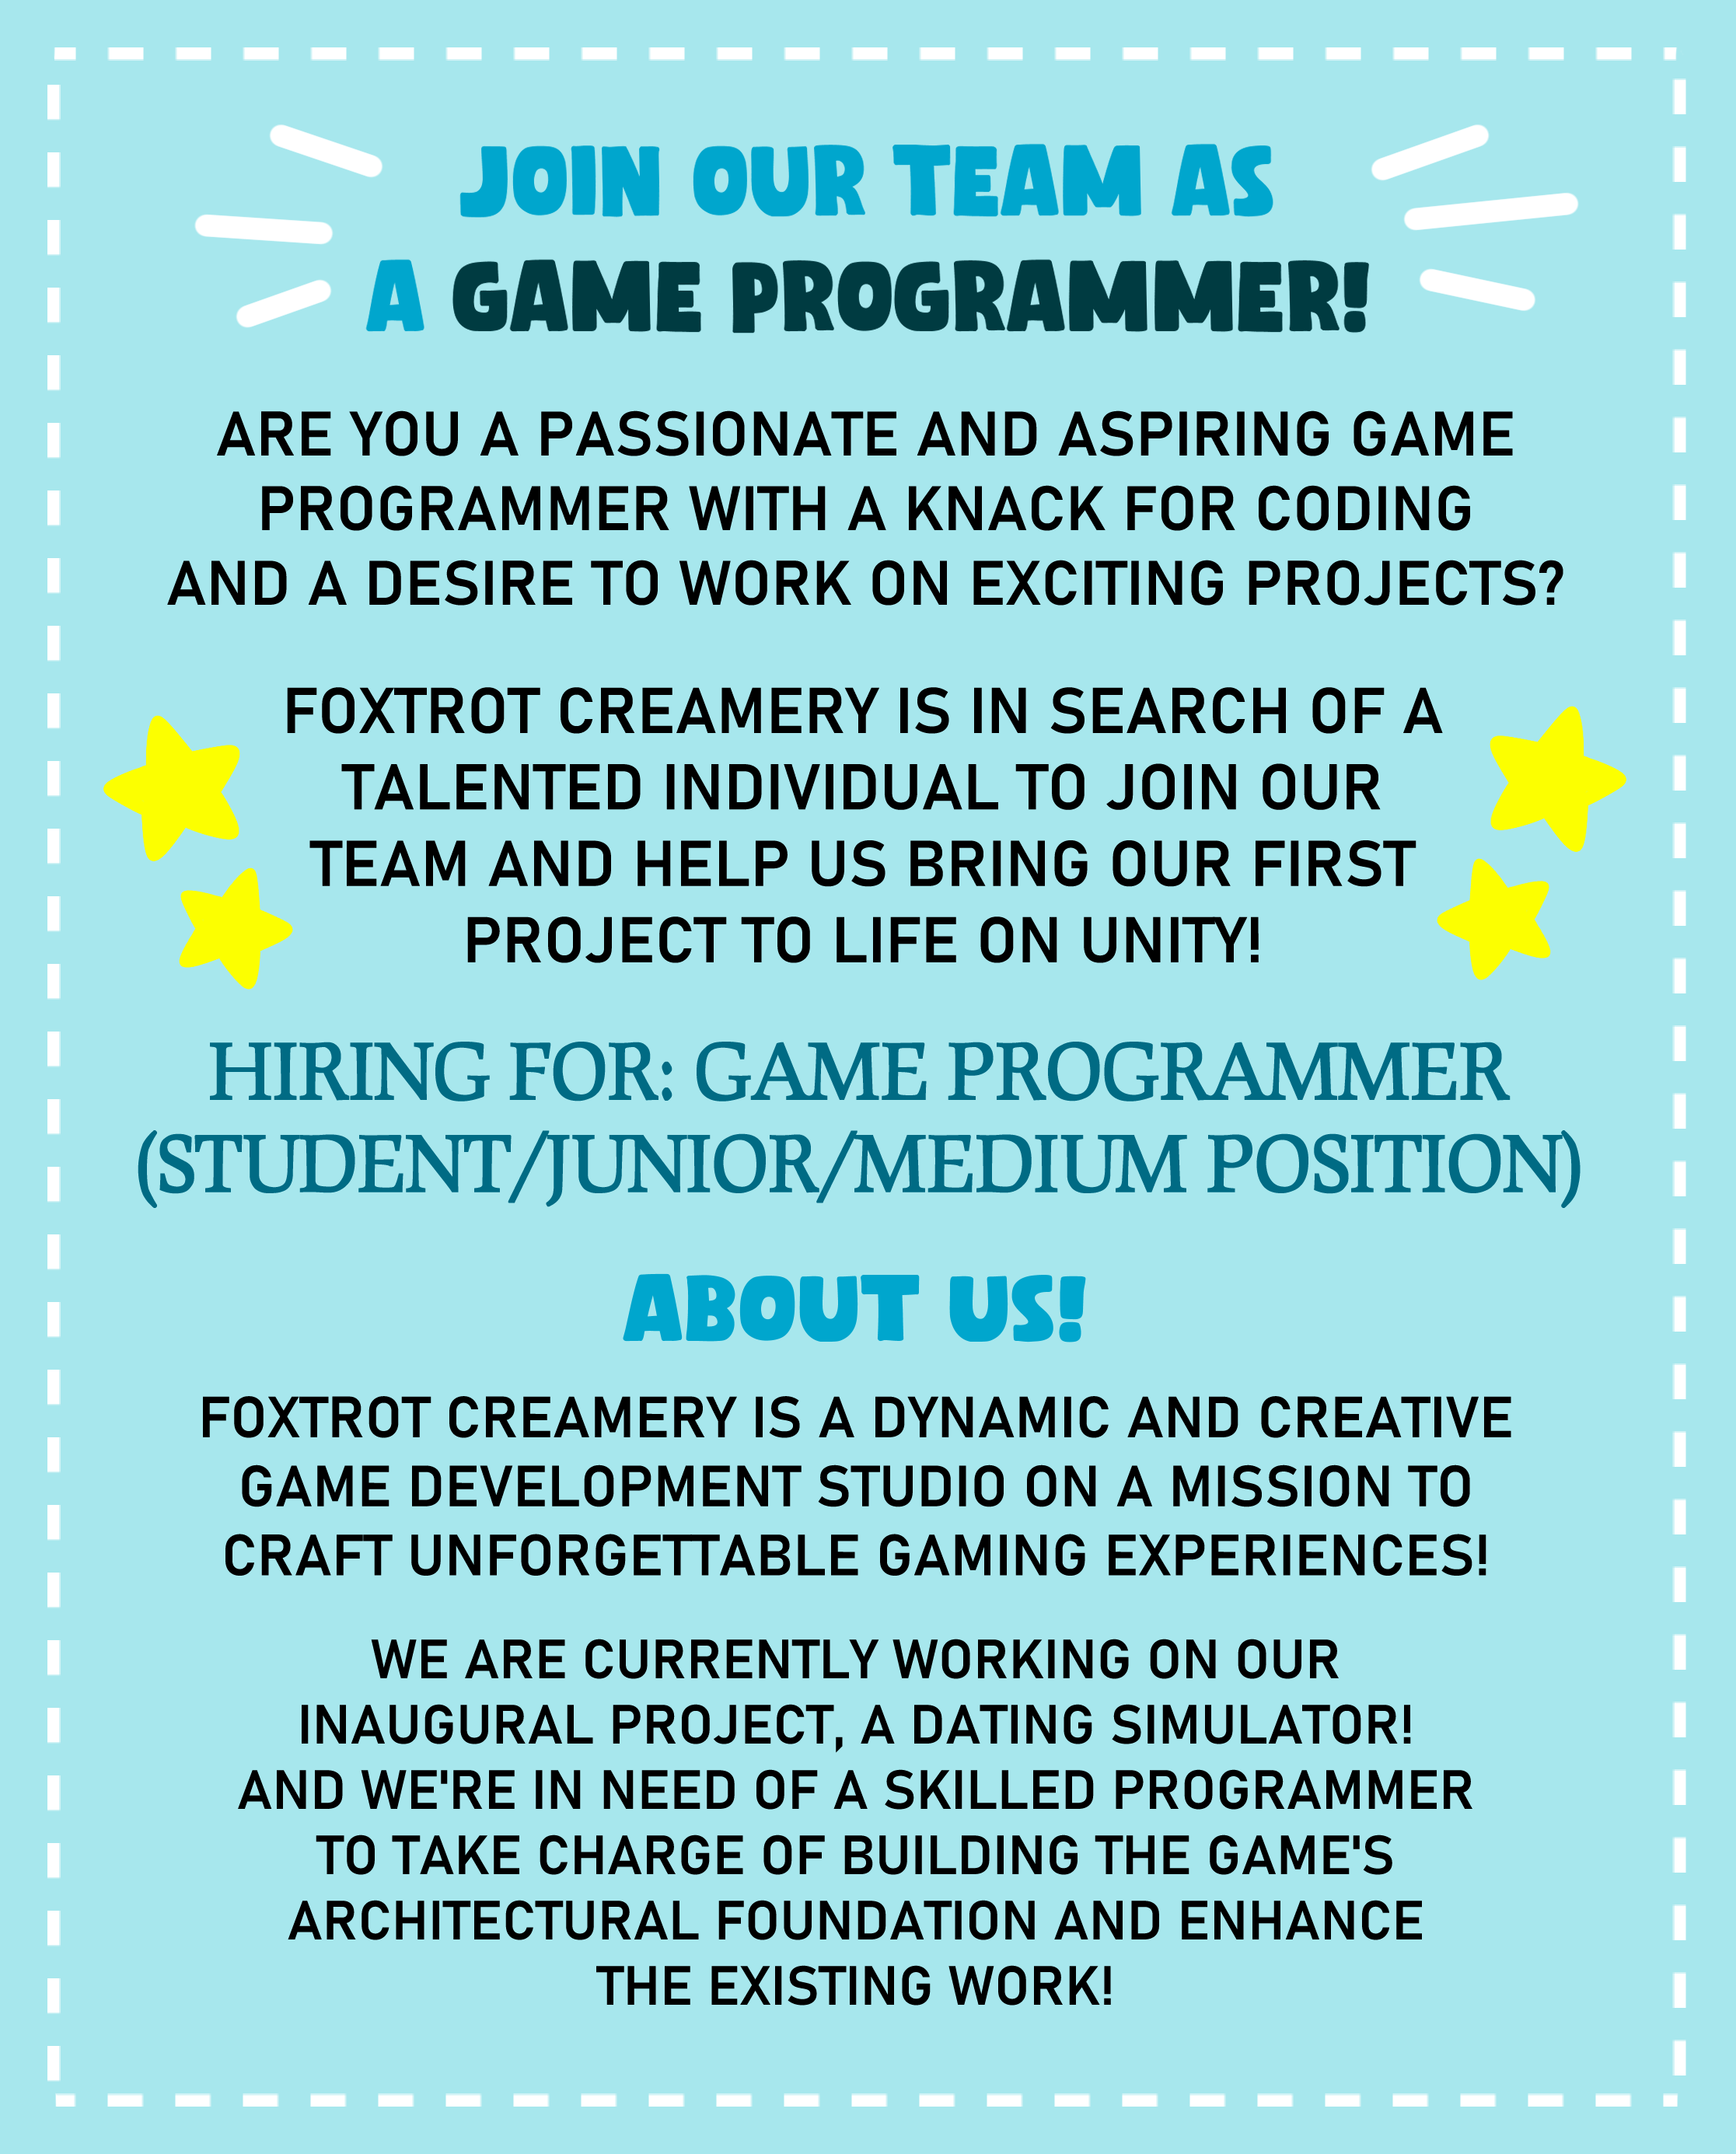 Foxtrot Creamery on X: FOXTROT CREAMERY IS LOOKING FOR PROGRAMMERS ‼️  please help spread the word! all applications should be sent to:  foxtrotcreamery@gmail.com come and join our growing team of passionate game